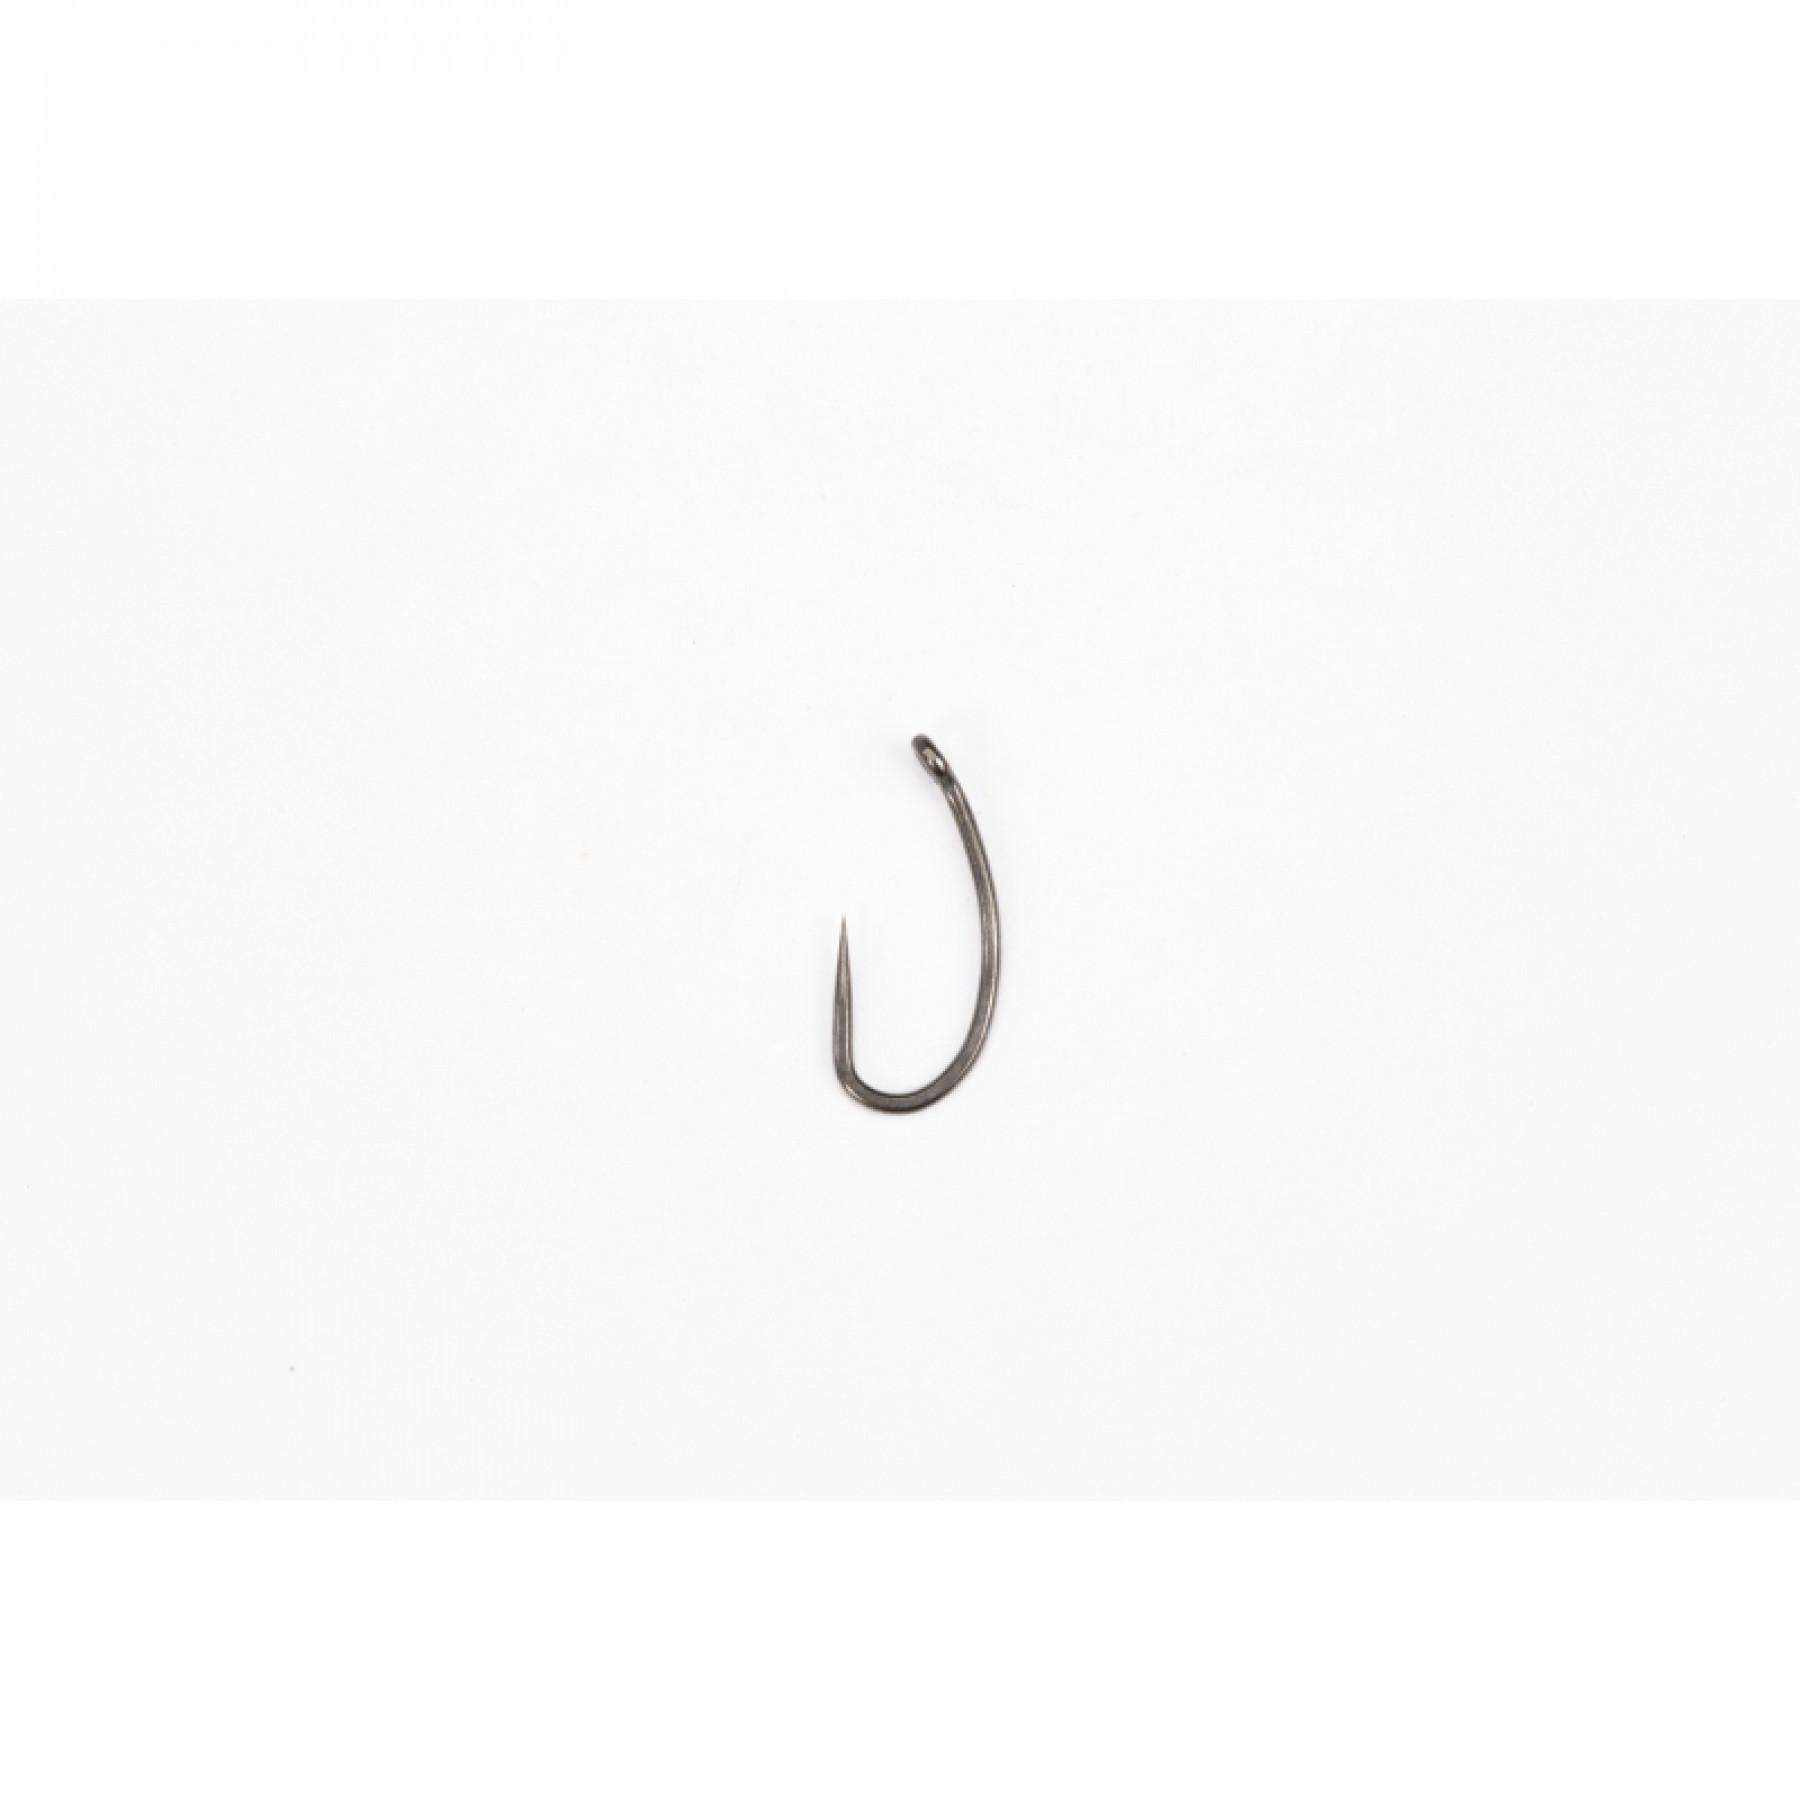 Hook Pinpoint Fang X size 7 without swivel